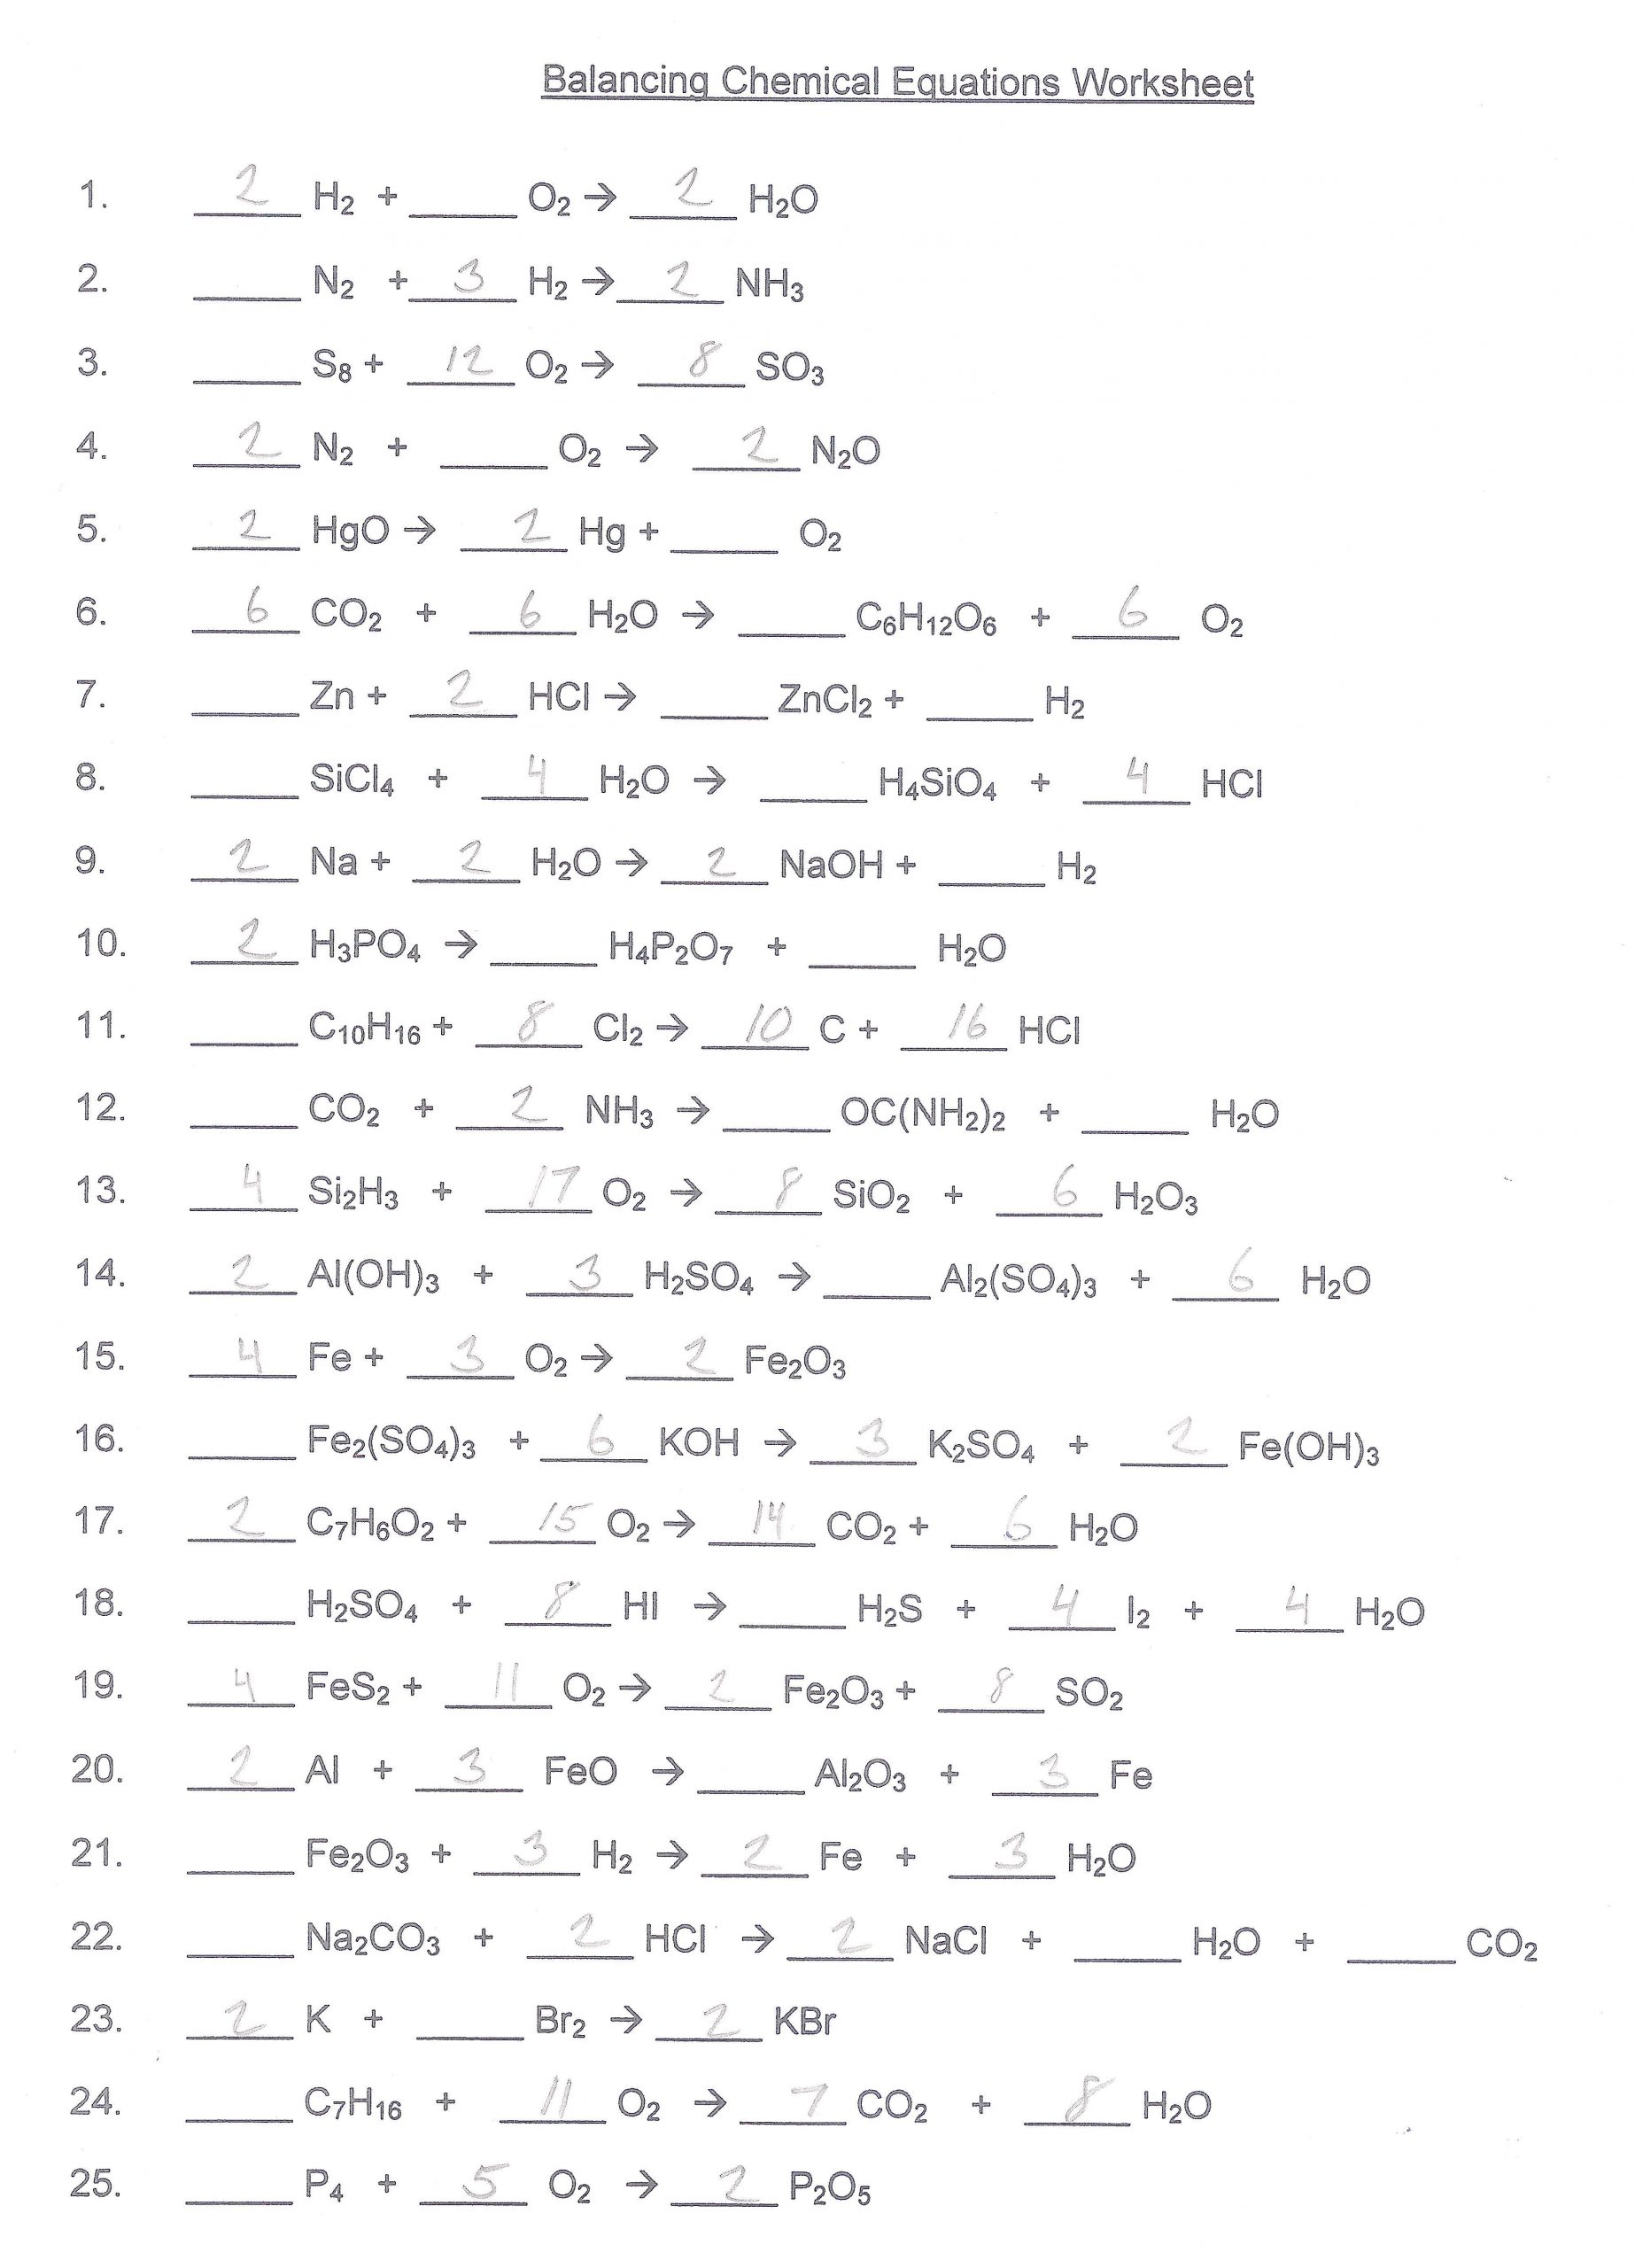 Balancing Equations Practice Worksheet Answers Balancing Chemical Equations Worksheet Answer Key